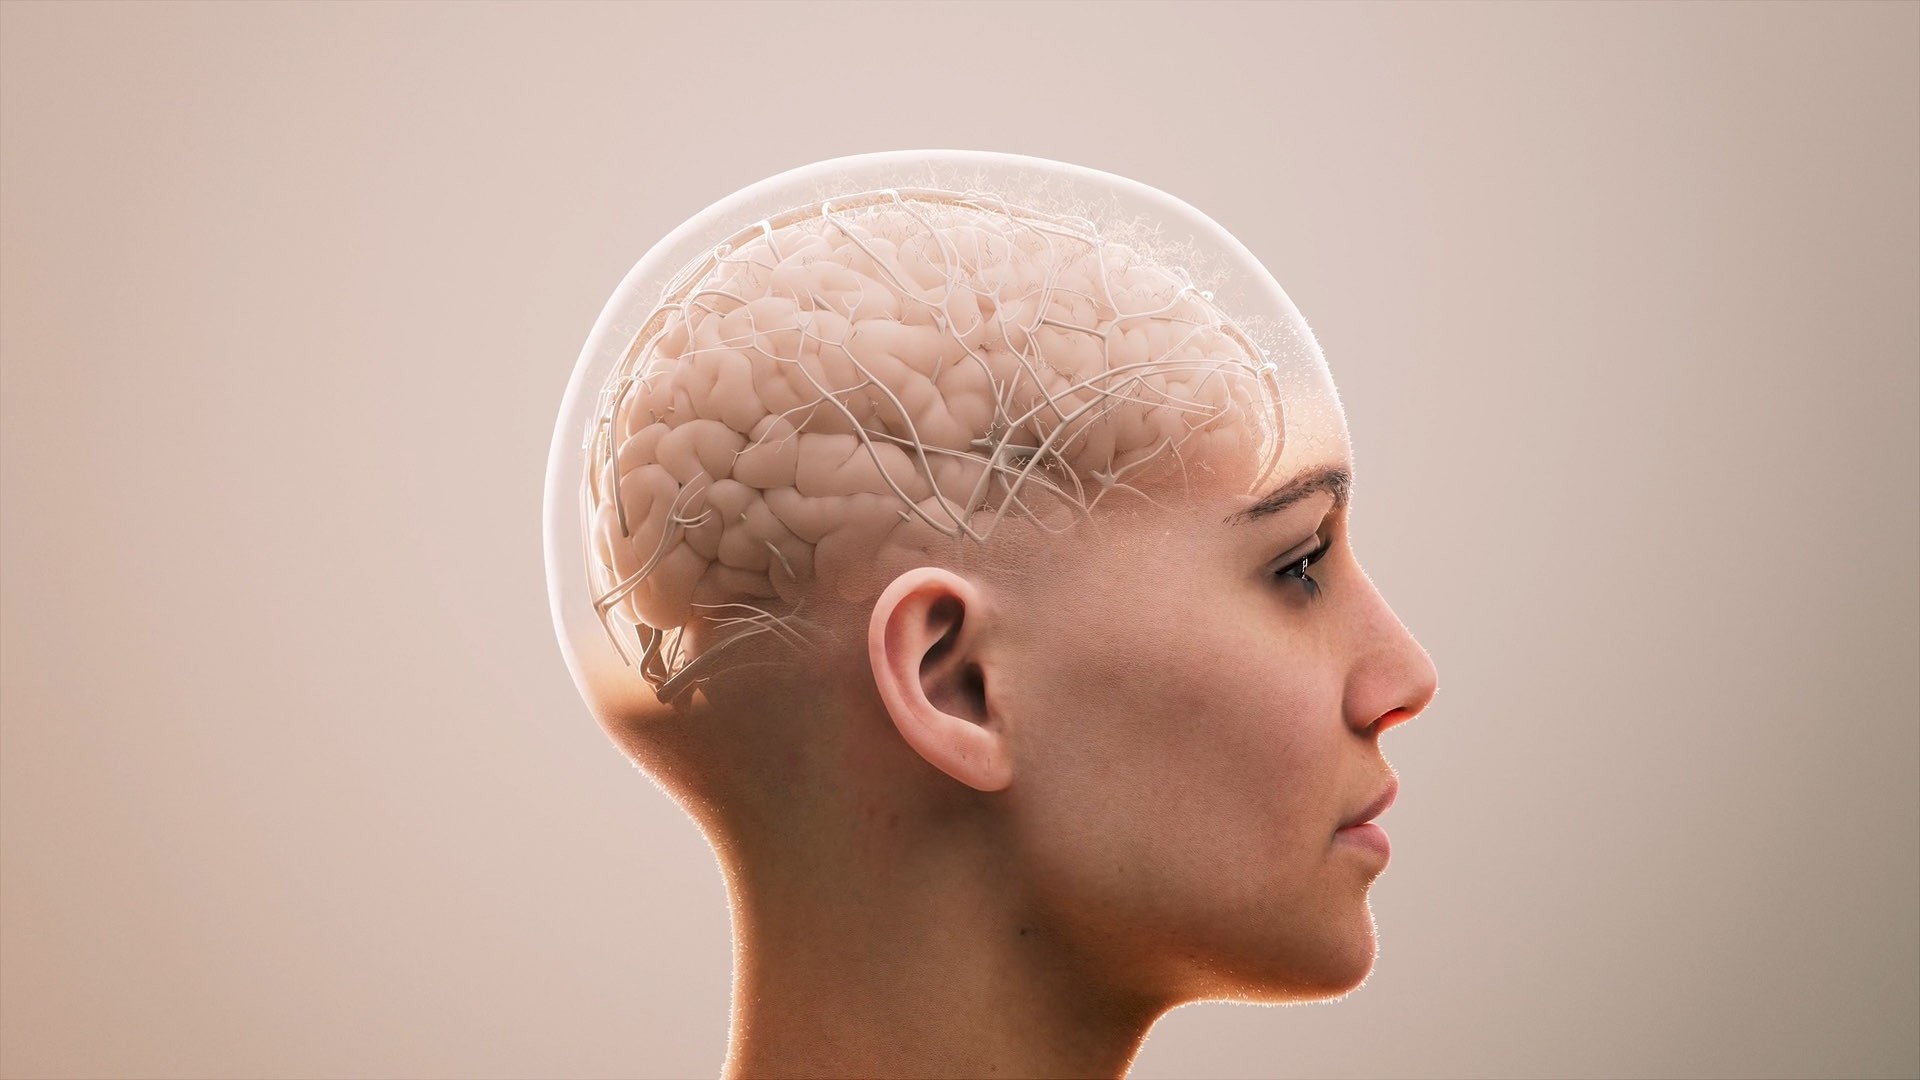 3D animation of sideview of head where brain network is visible.jpg